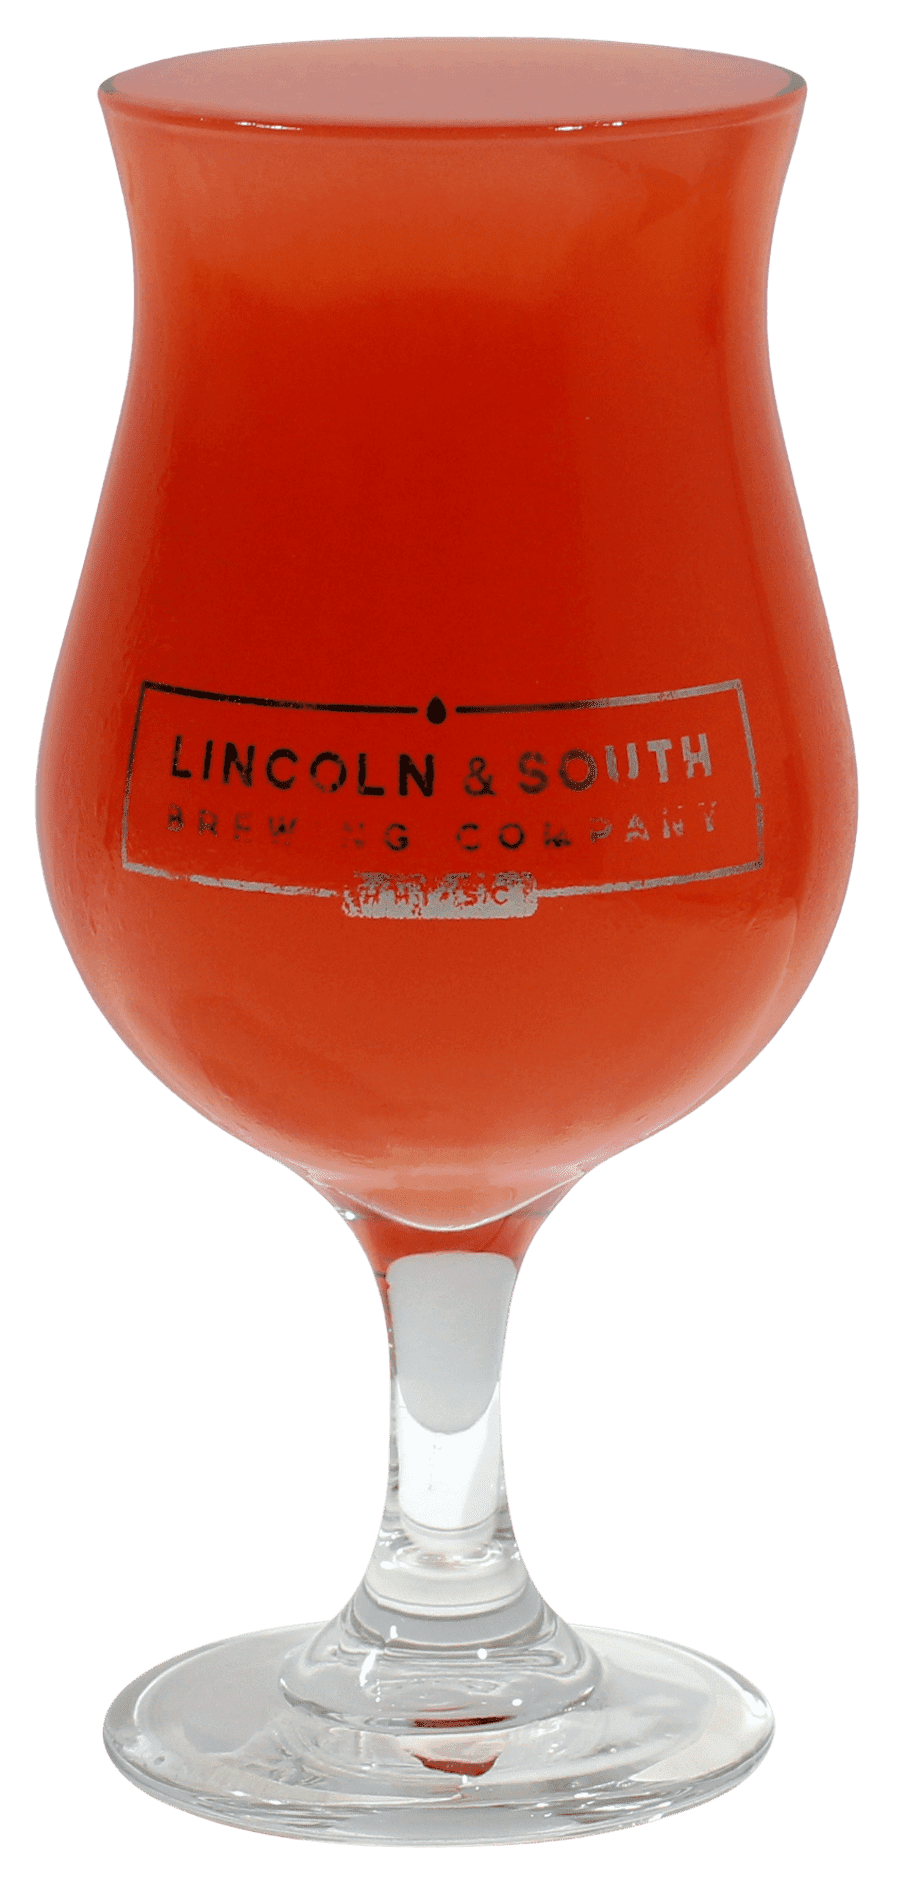 Love Games is a sour beer offered by Lincoln & South Brewery on Hilton Head Island, SC